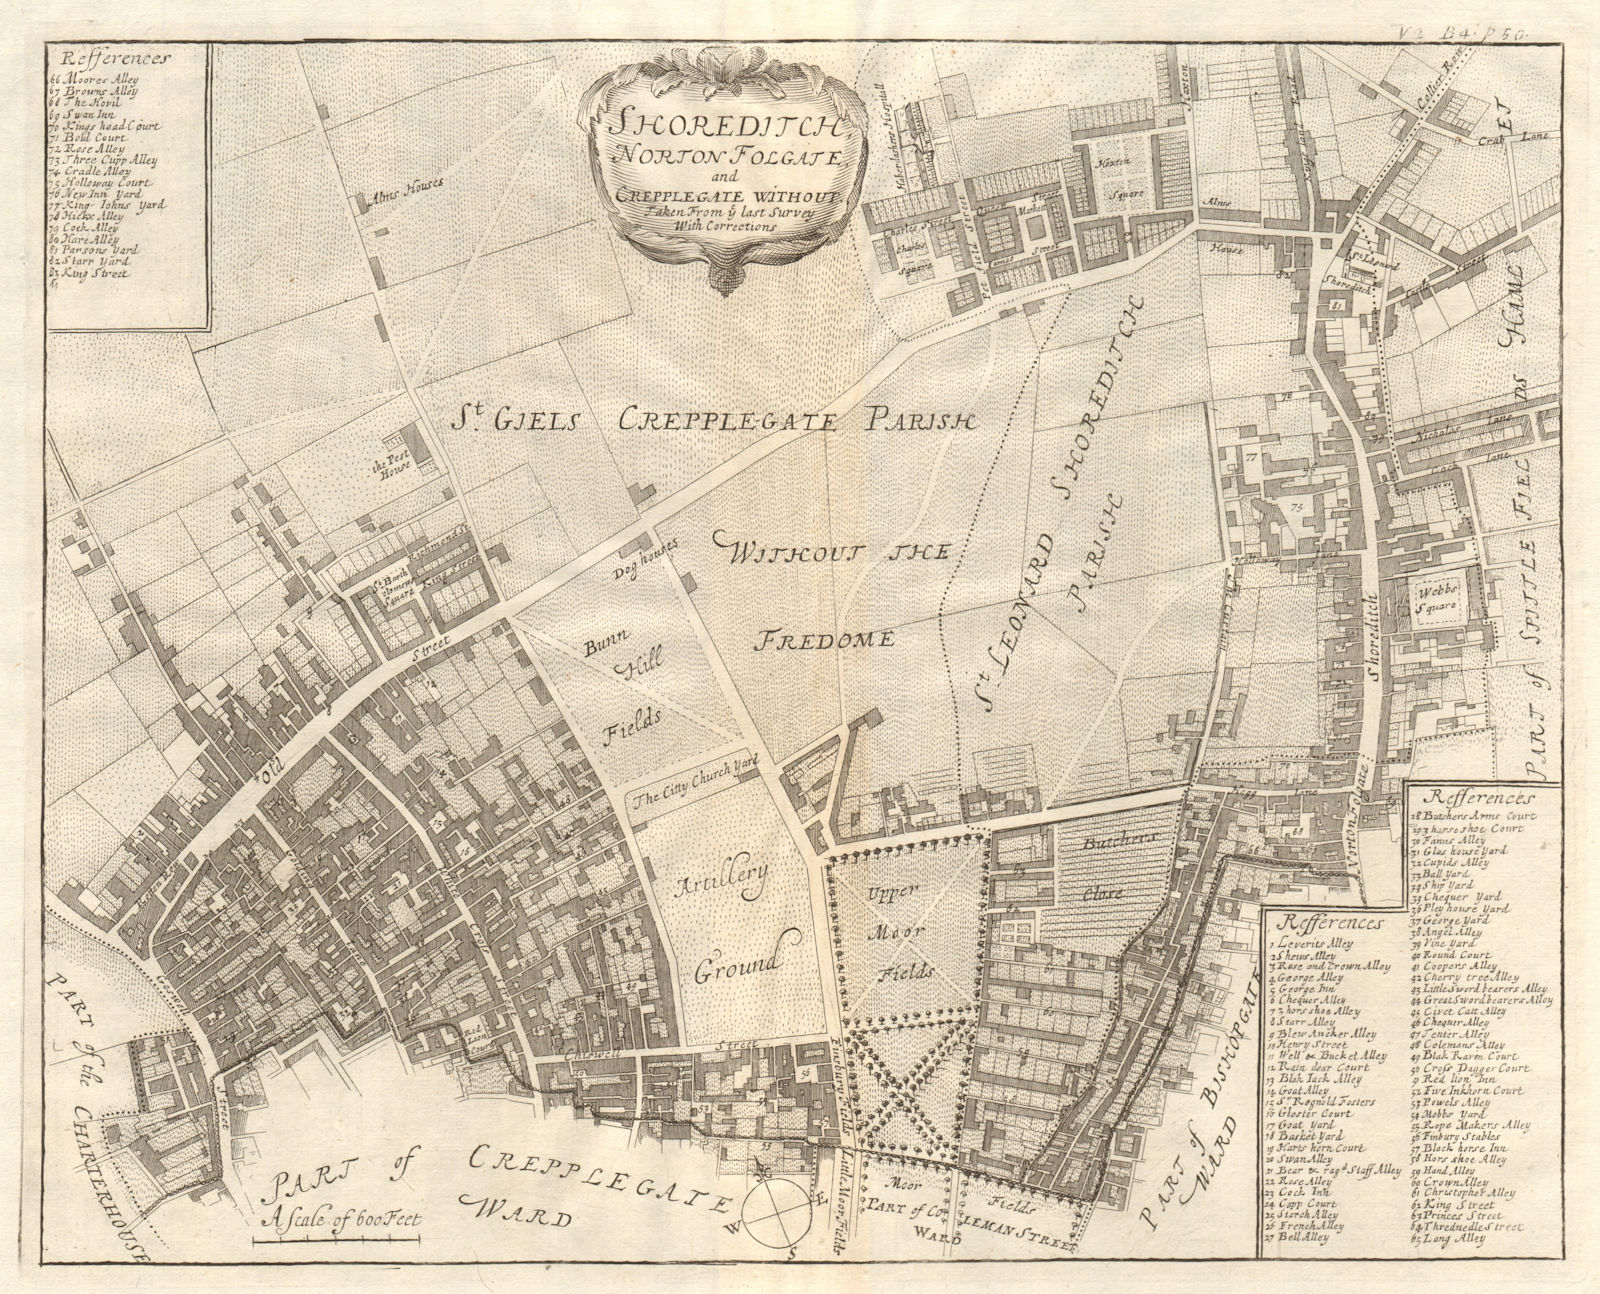 Shoreditch, Norton Folgate & Cripplegate Without. Hoxton. STOW/STRYPE 1720 map